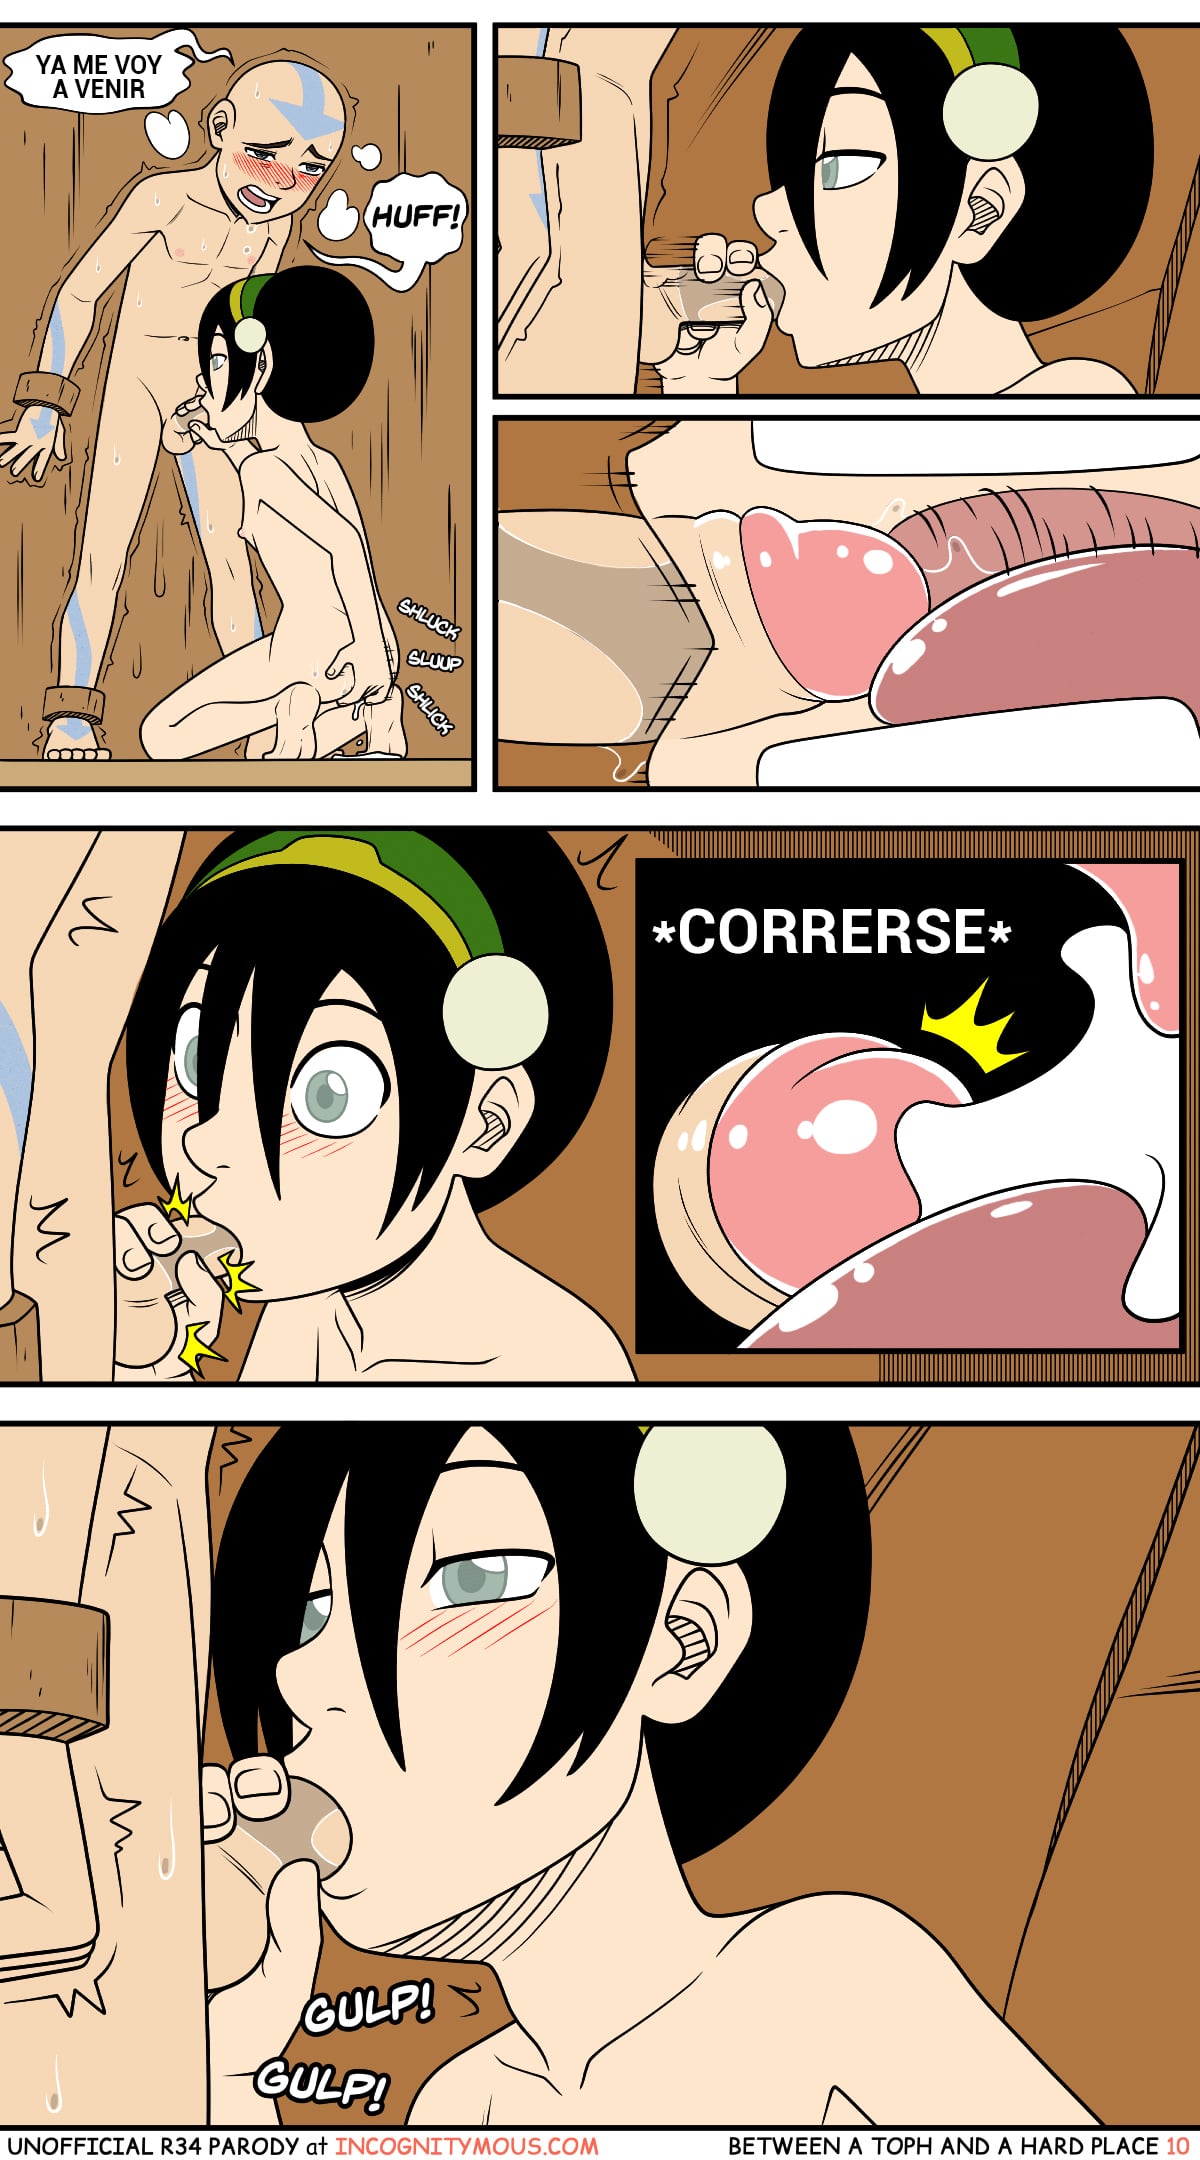 Between a Toph and a Hard Place - 10